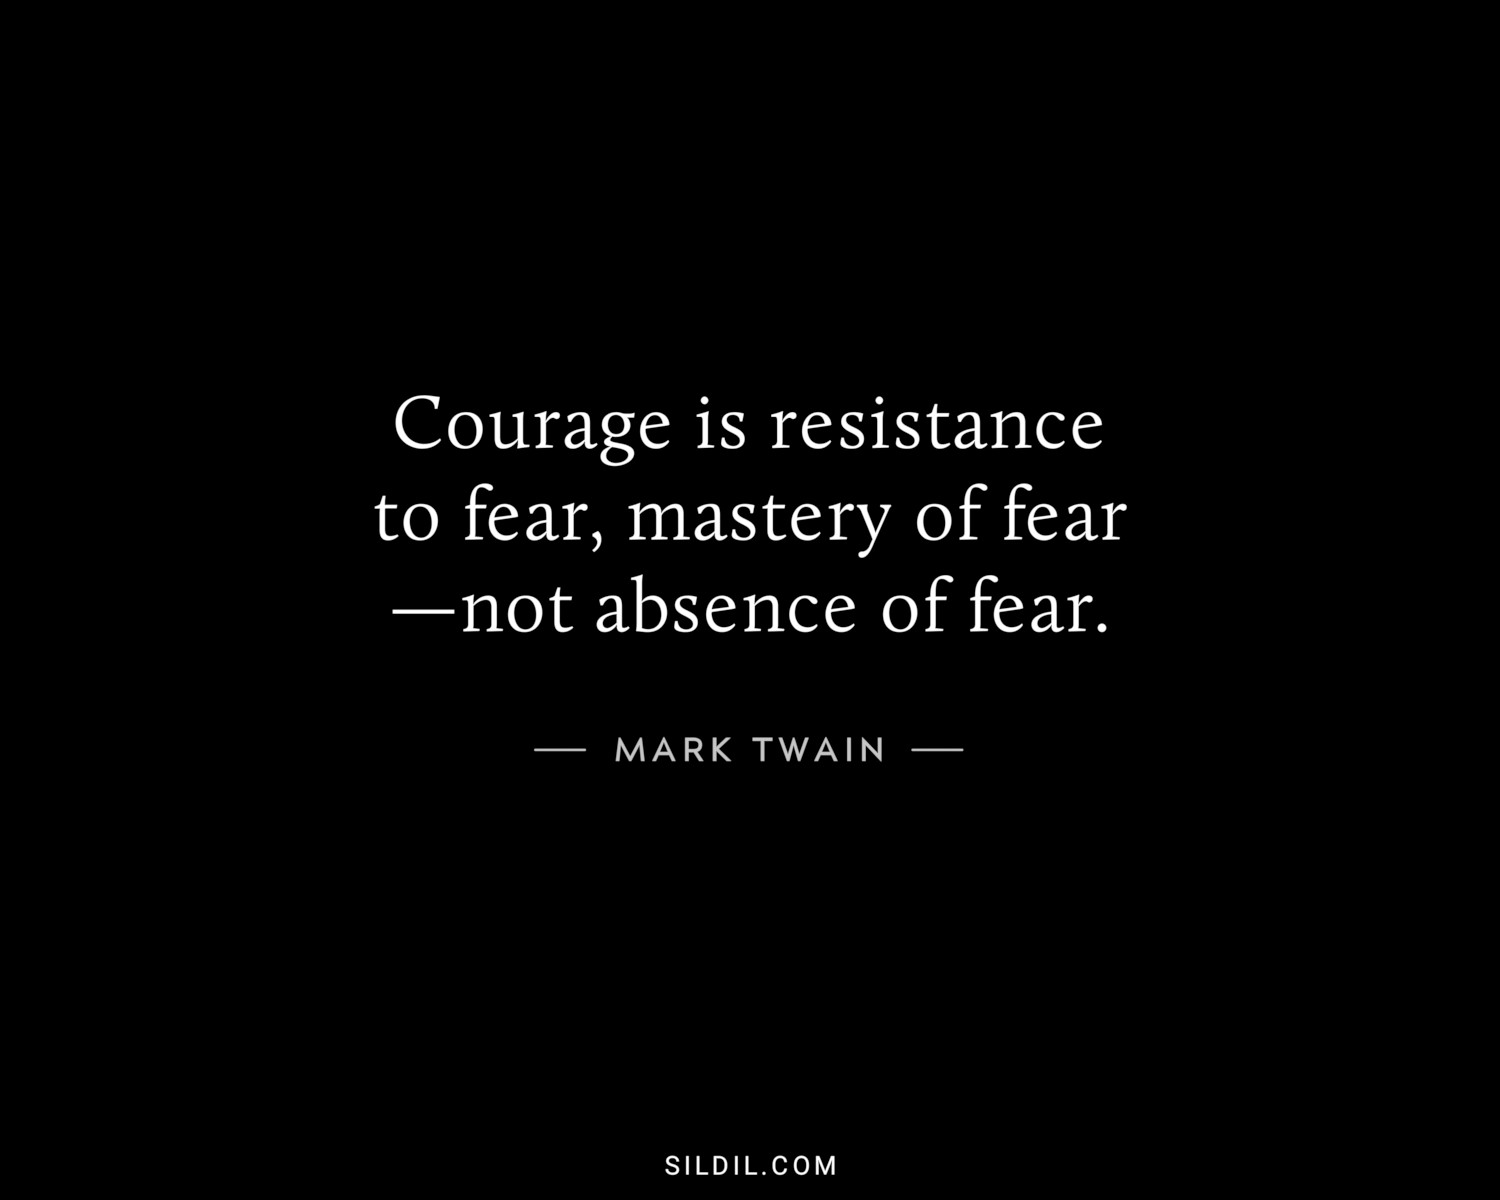 Courage is resistance to fear, mastery of fear—not absence of fear.